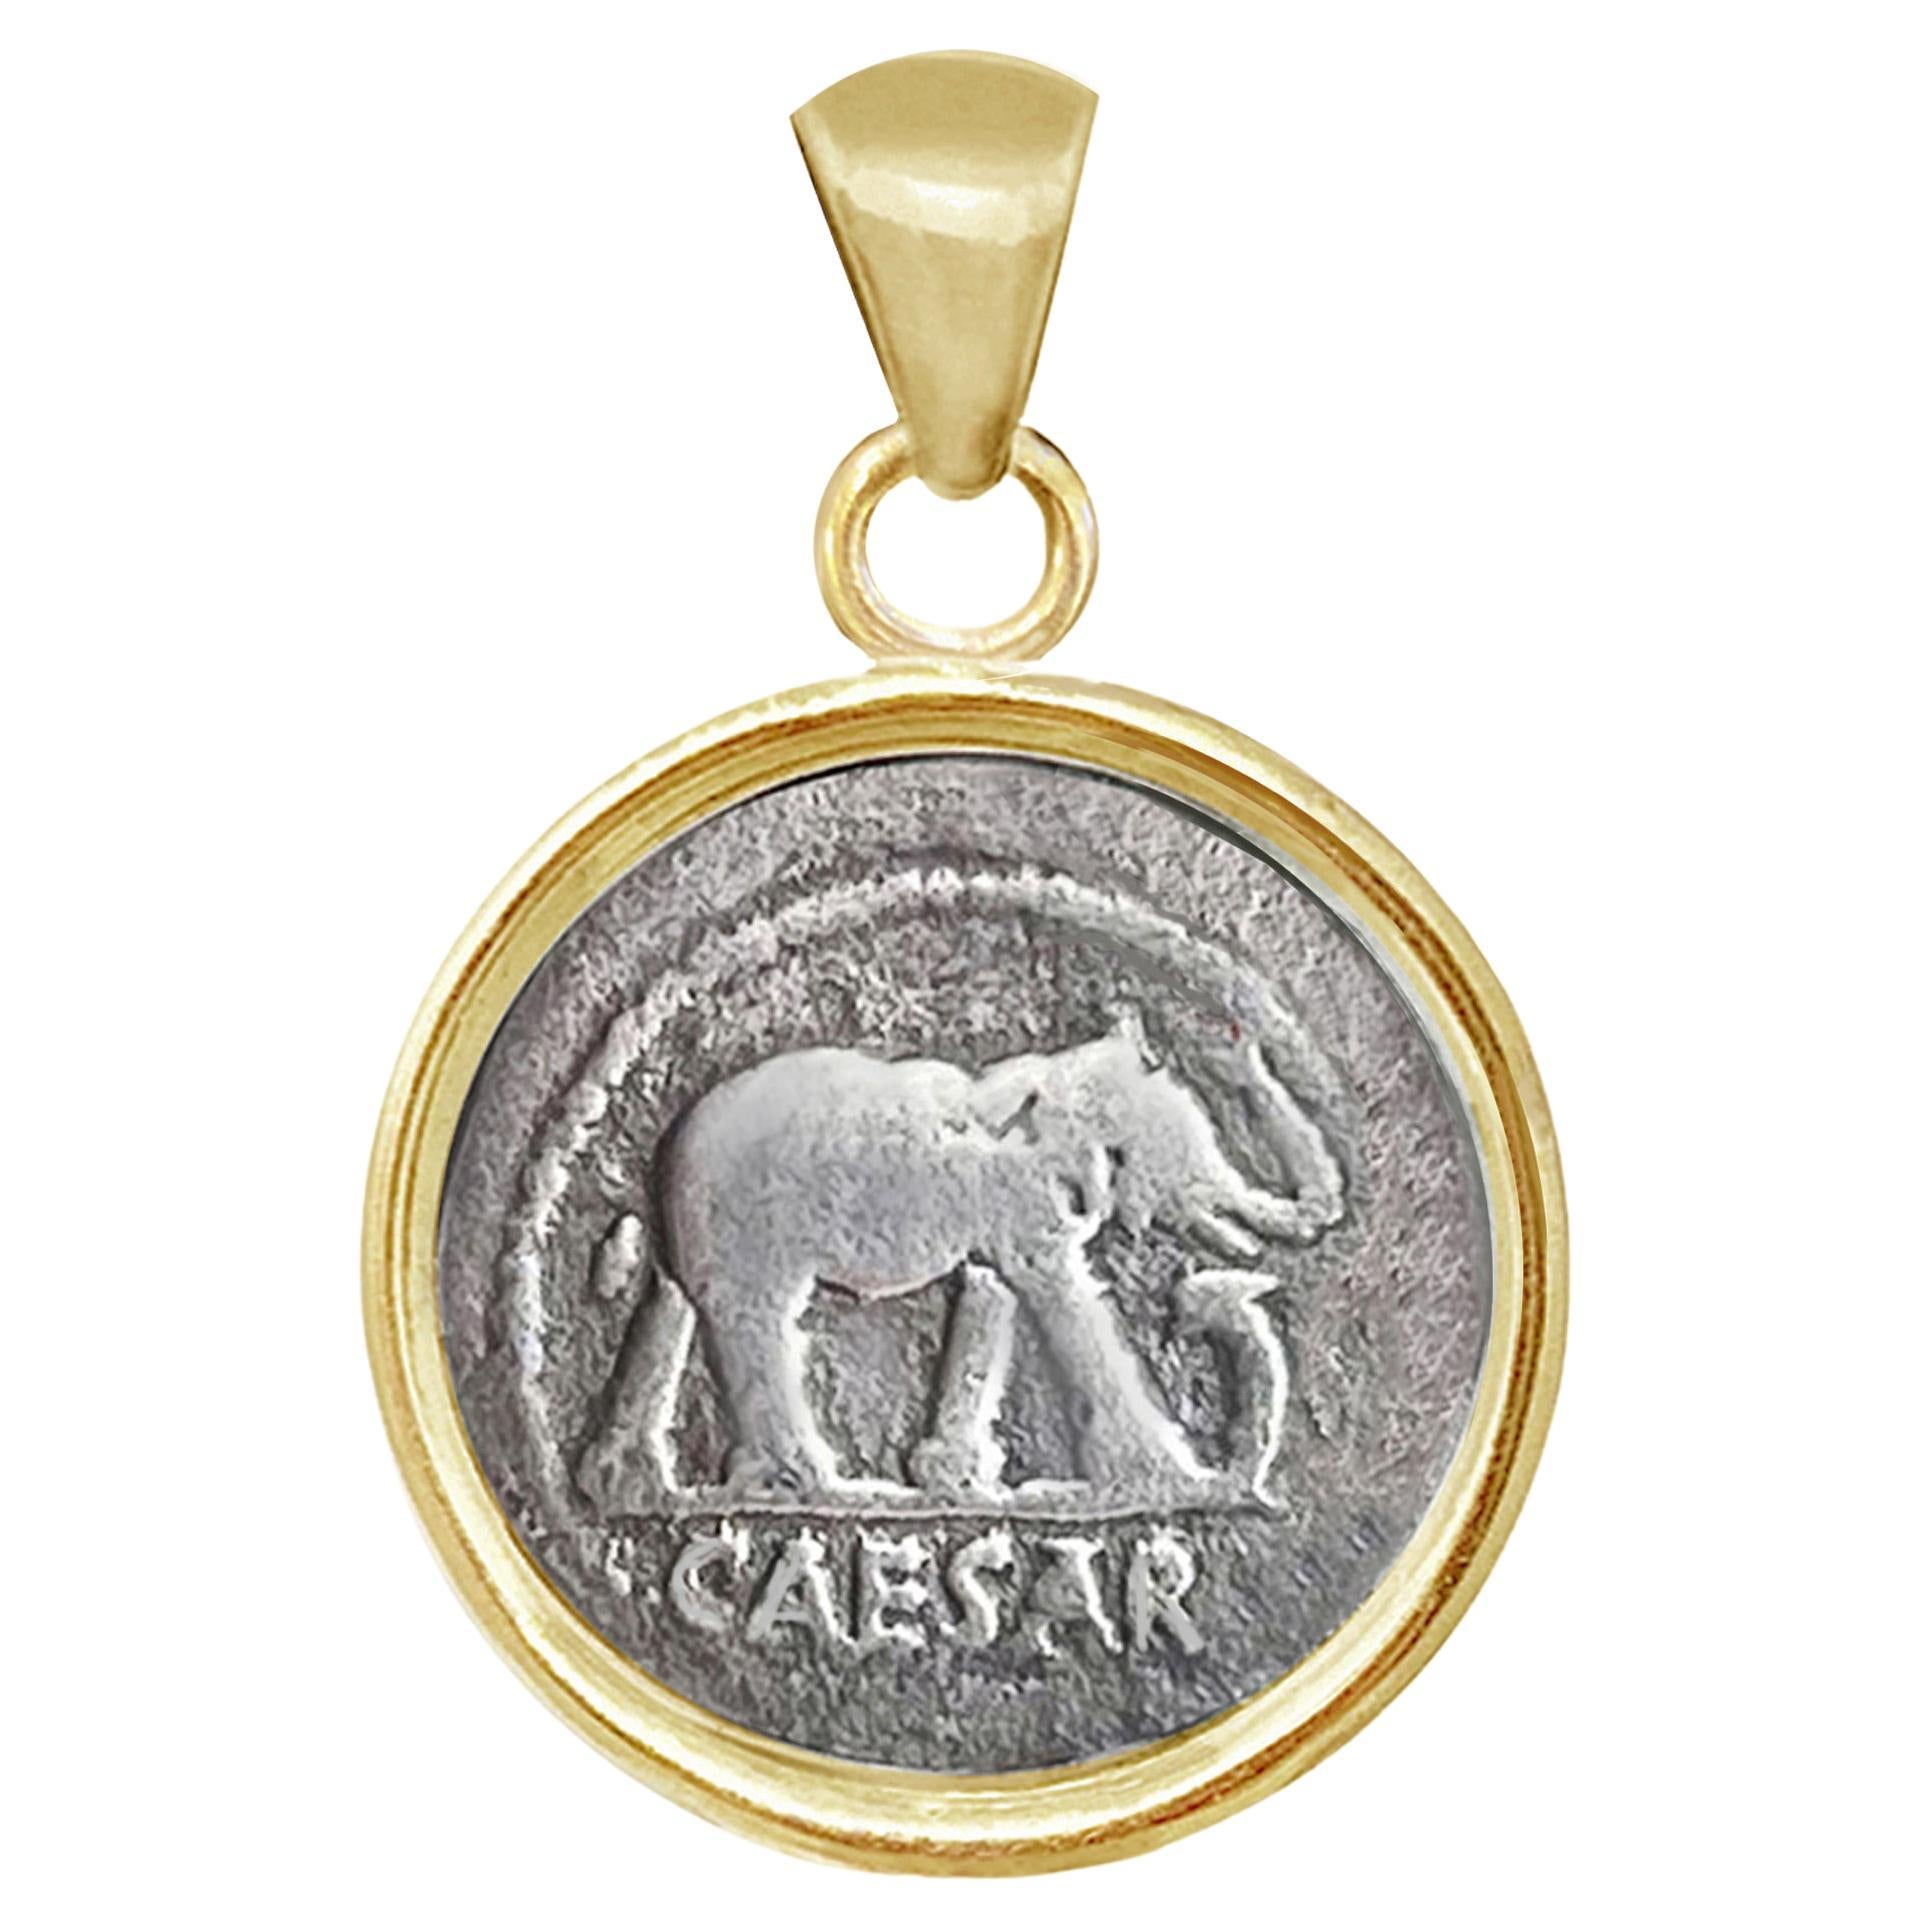 Roman Coin '49 BC' Gold Pendant Depicting an Elephant 'Minted by Julius Caesar'